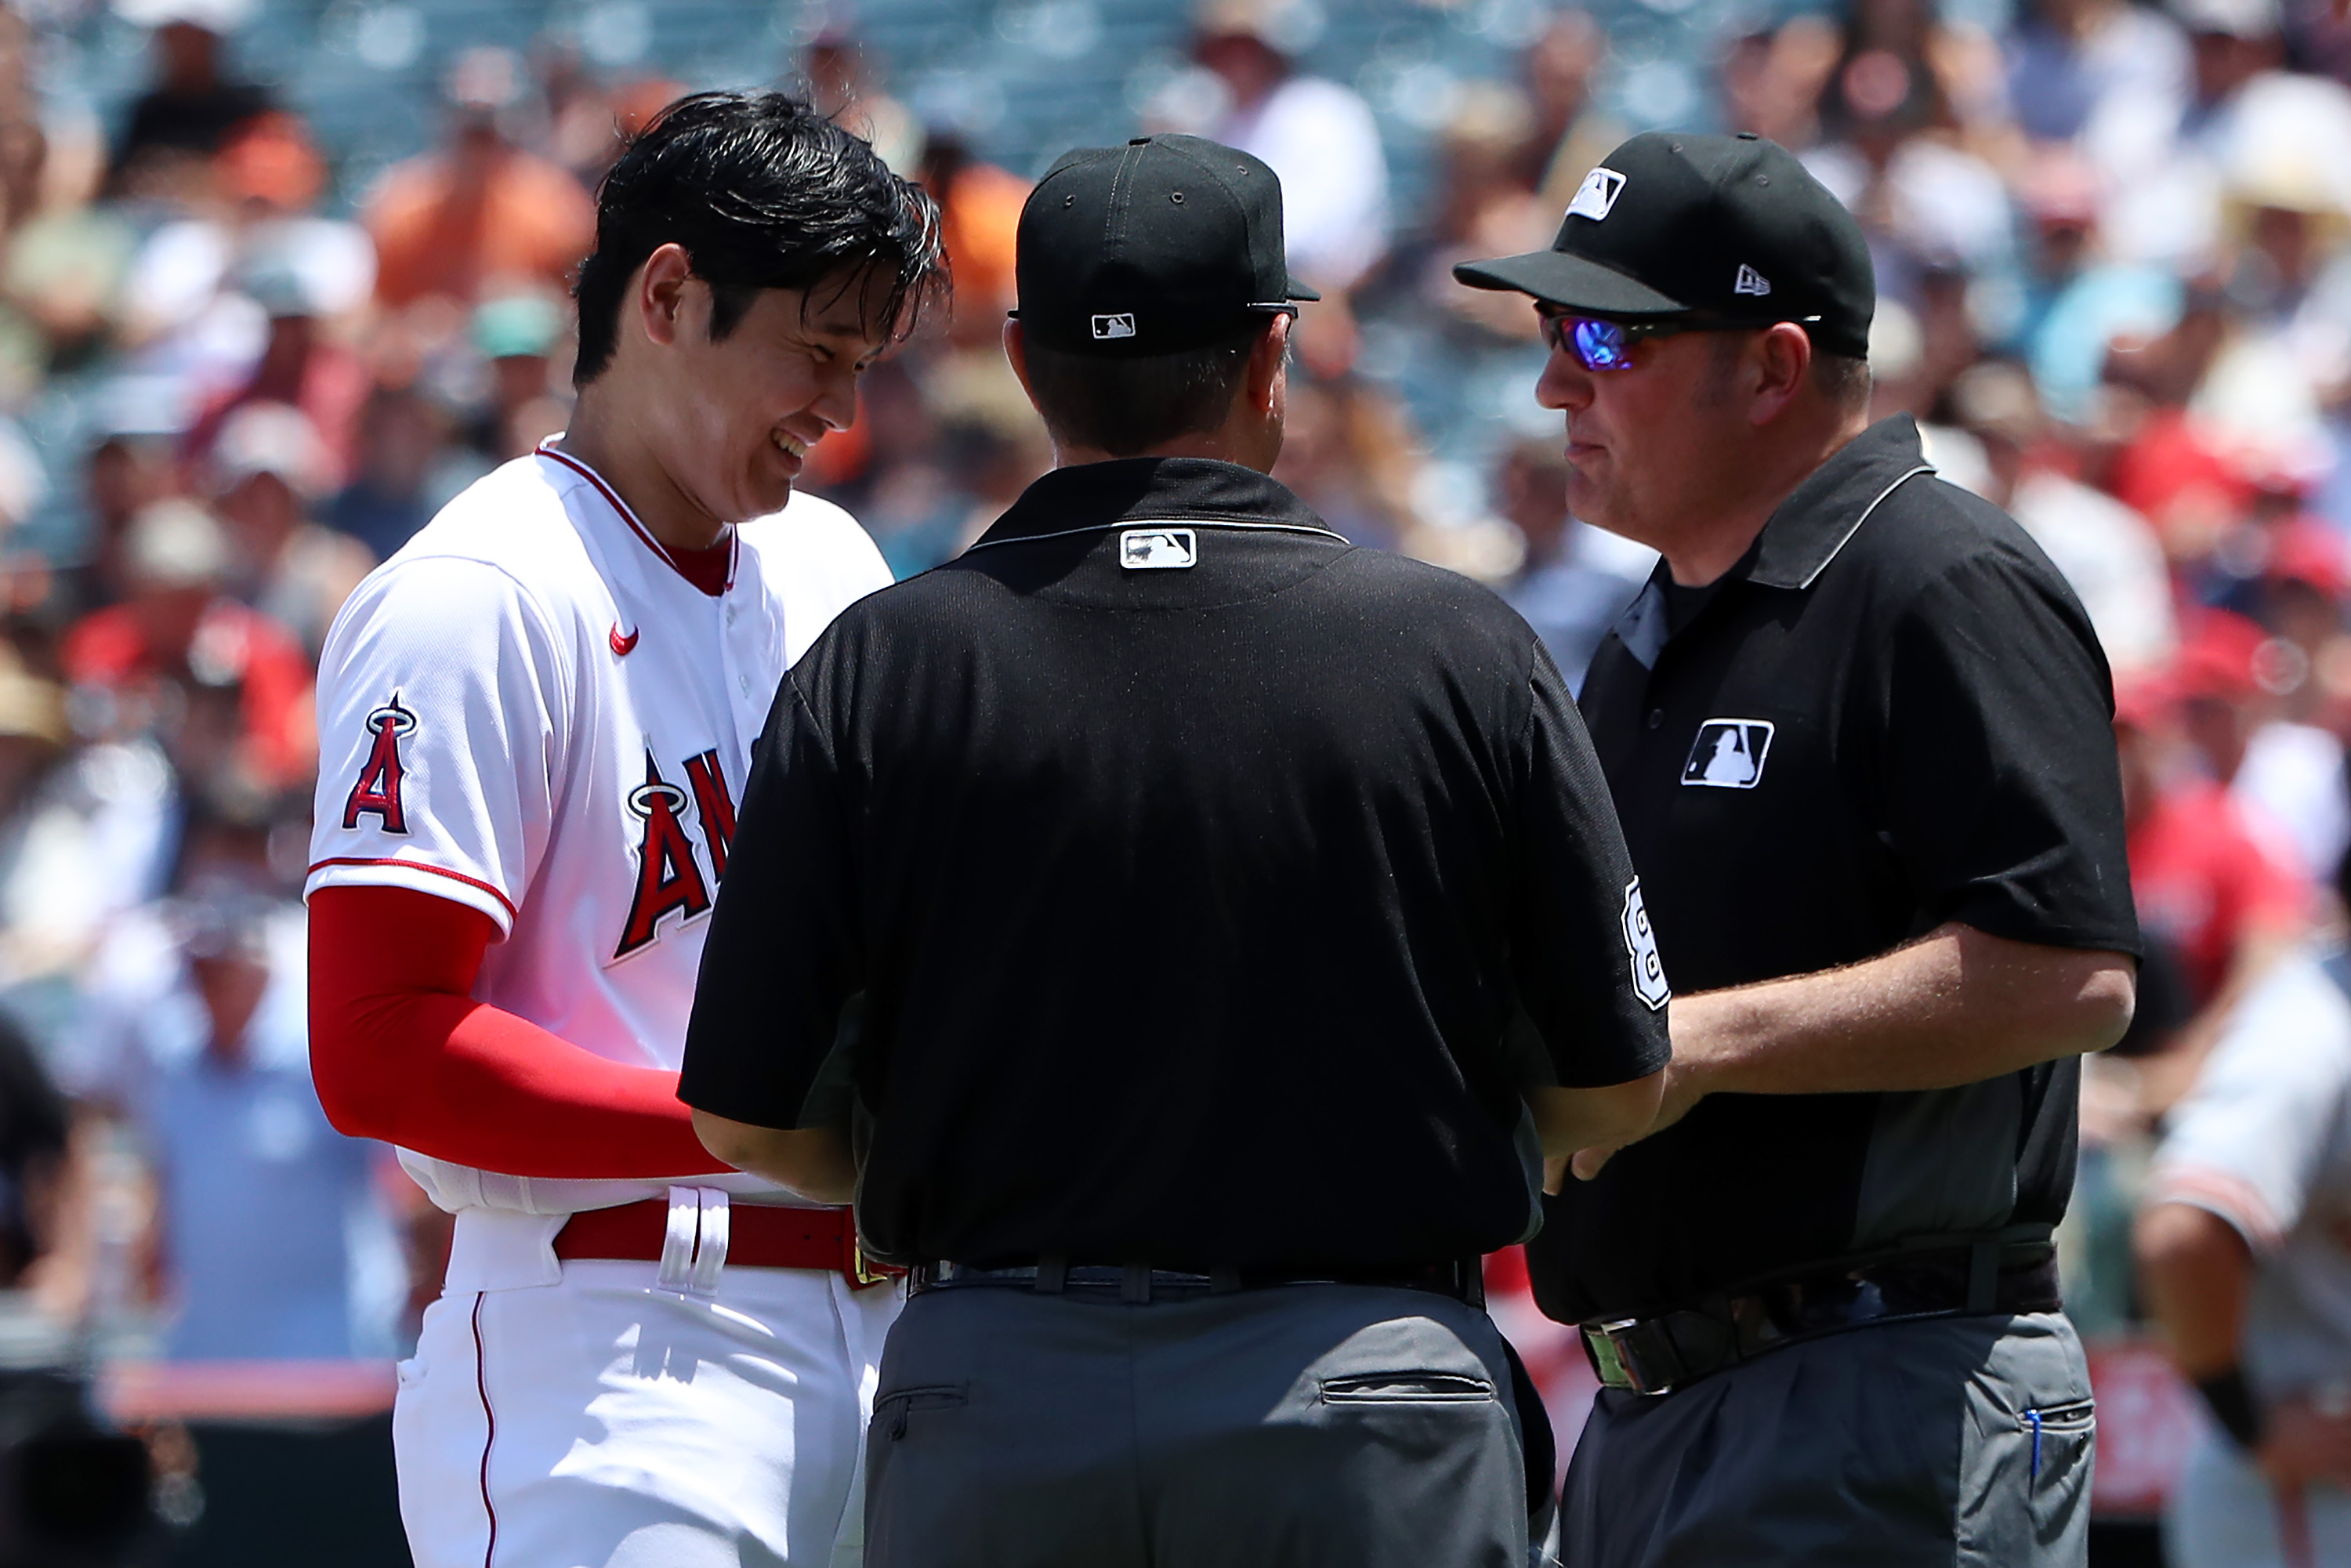 Shohei Ohtani chuckles good-naturedly through a search for sticky stuff.